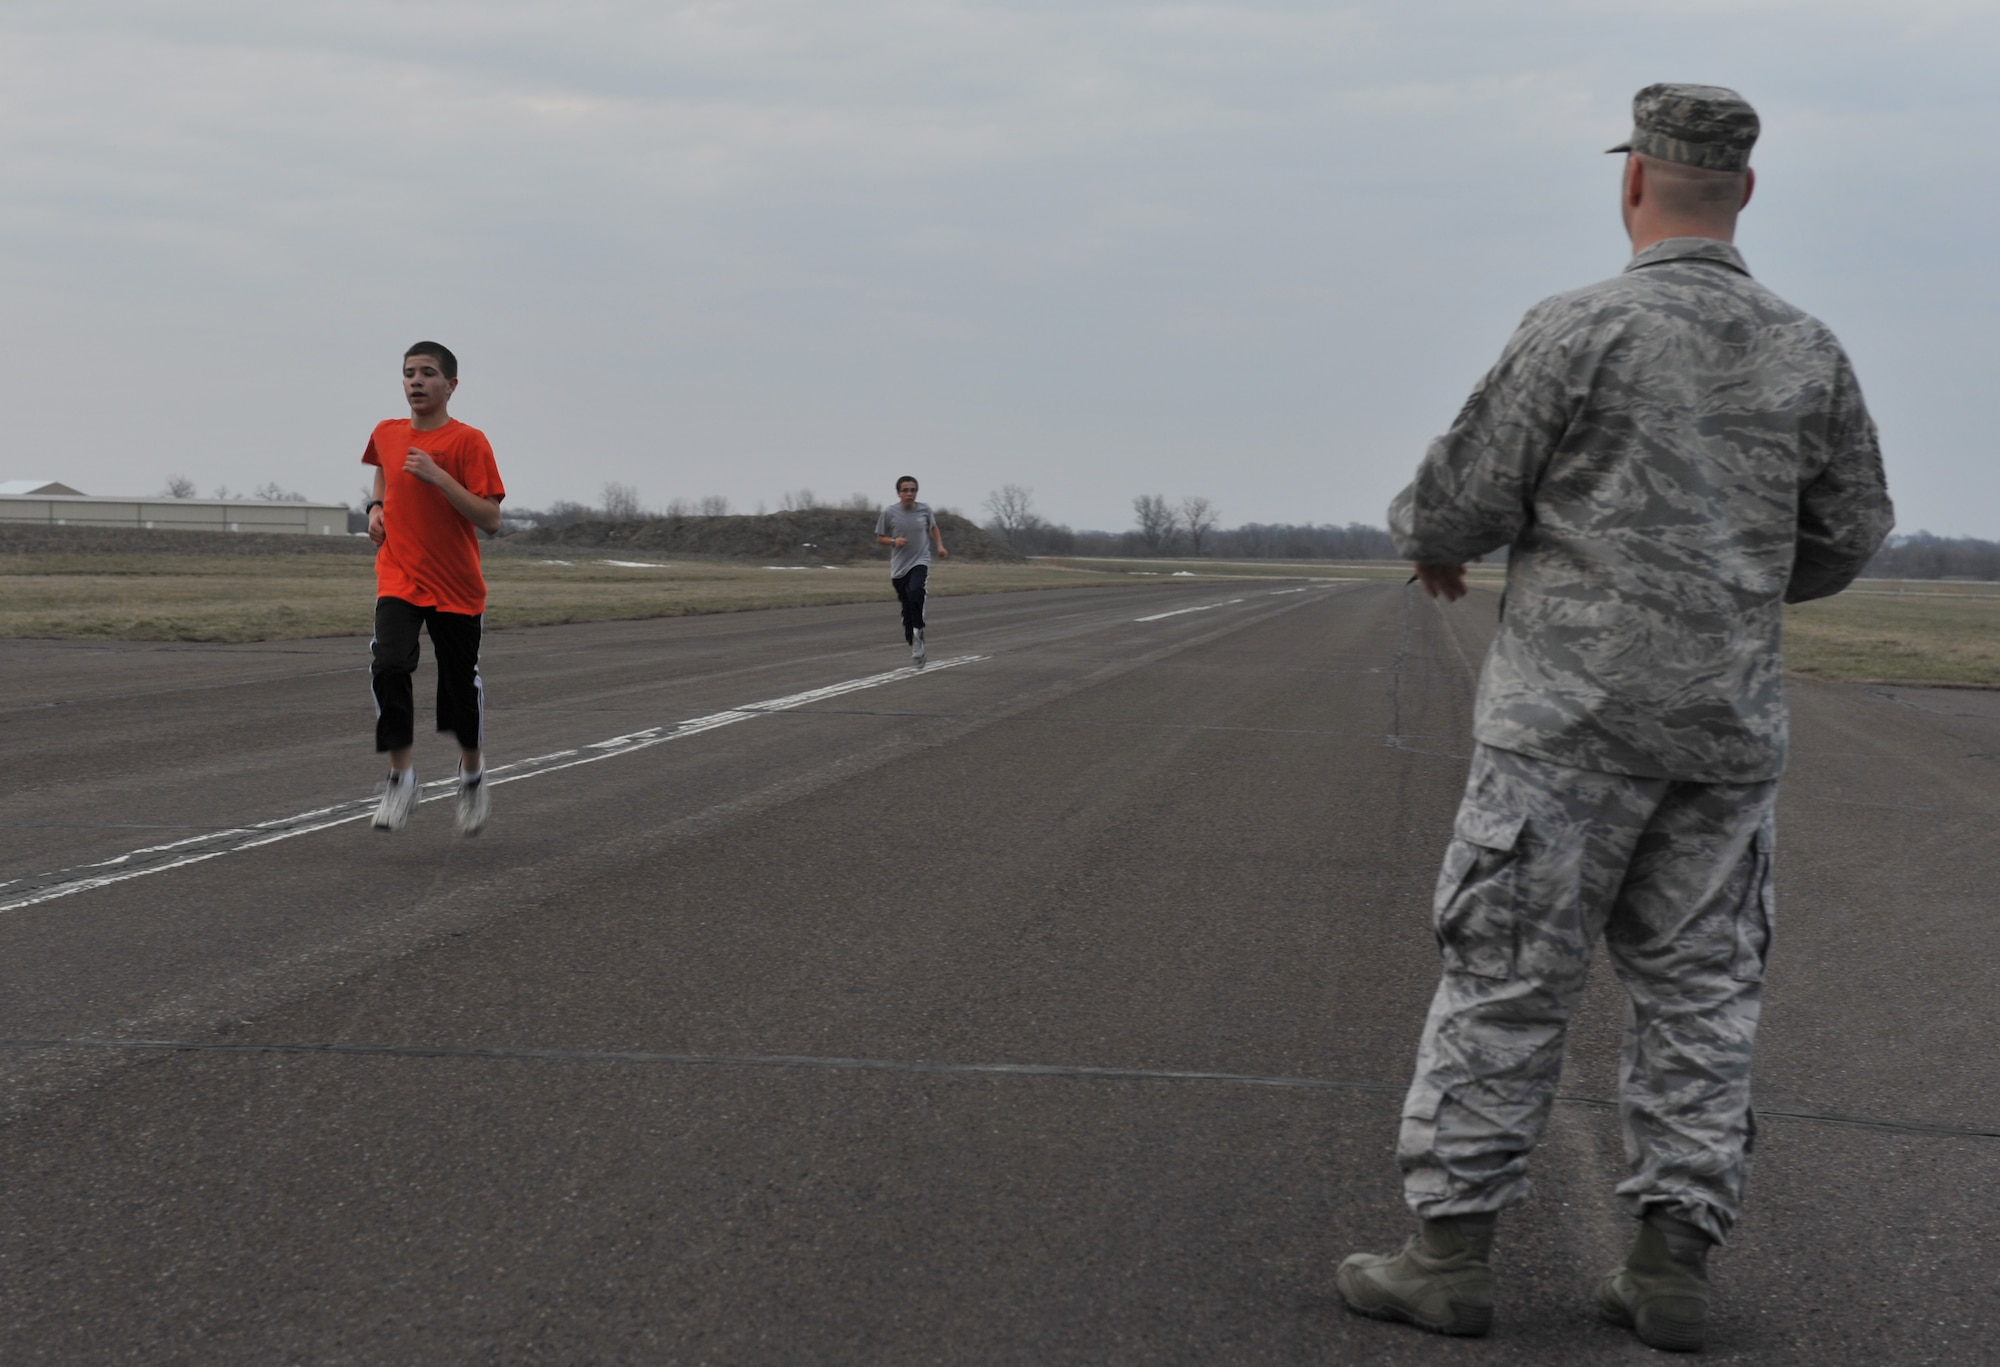 Master Sgt. William Sander, 509th Comptroller Squadron financial services superintendent, records run times for  Alex, 14, and Breandan, 13, Civil Air Patrol cadets during their physical fitness assessment, March 28, 2013, in Sedalia, Mo.. Sander also monitors for safety during all cadet activities. (U.S. Air Force photo by Heidi Hunt/Released)